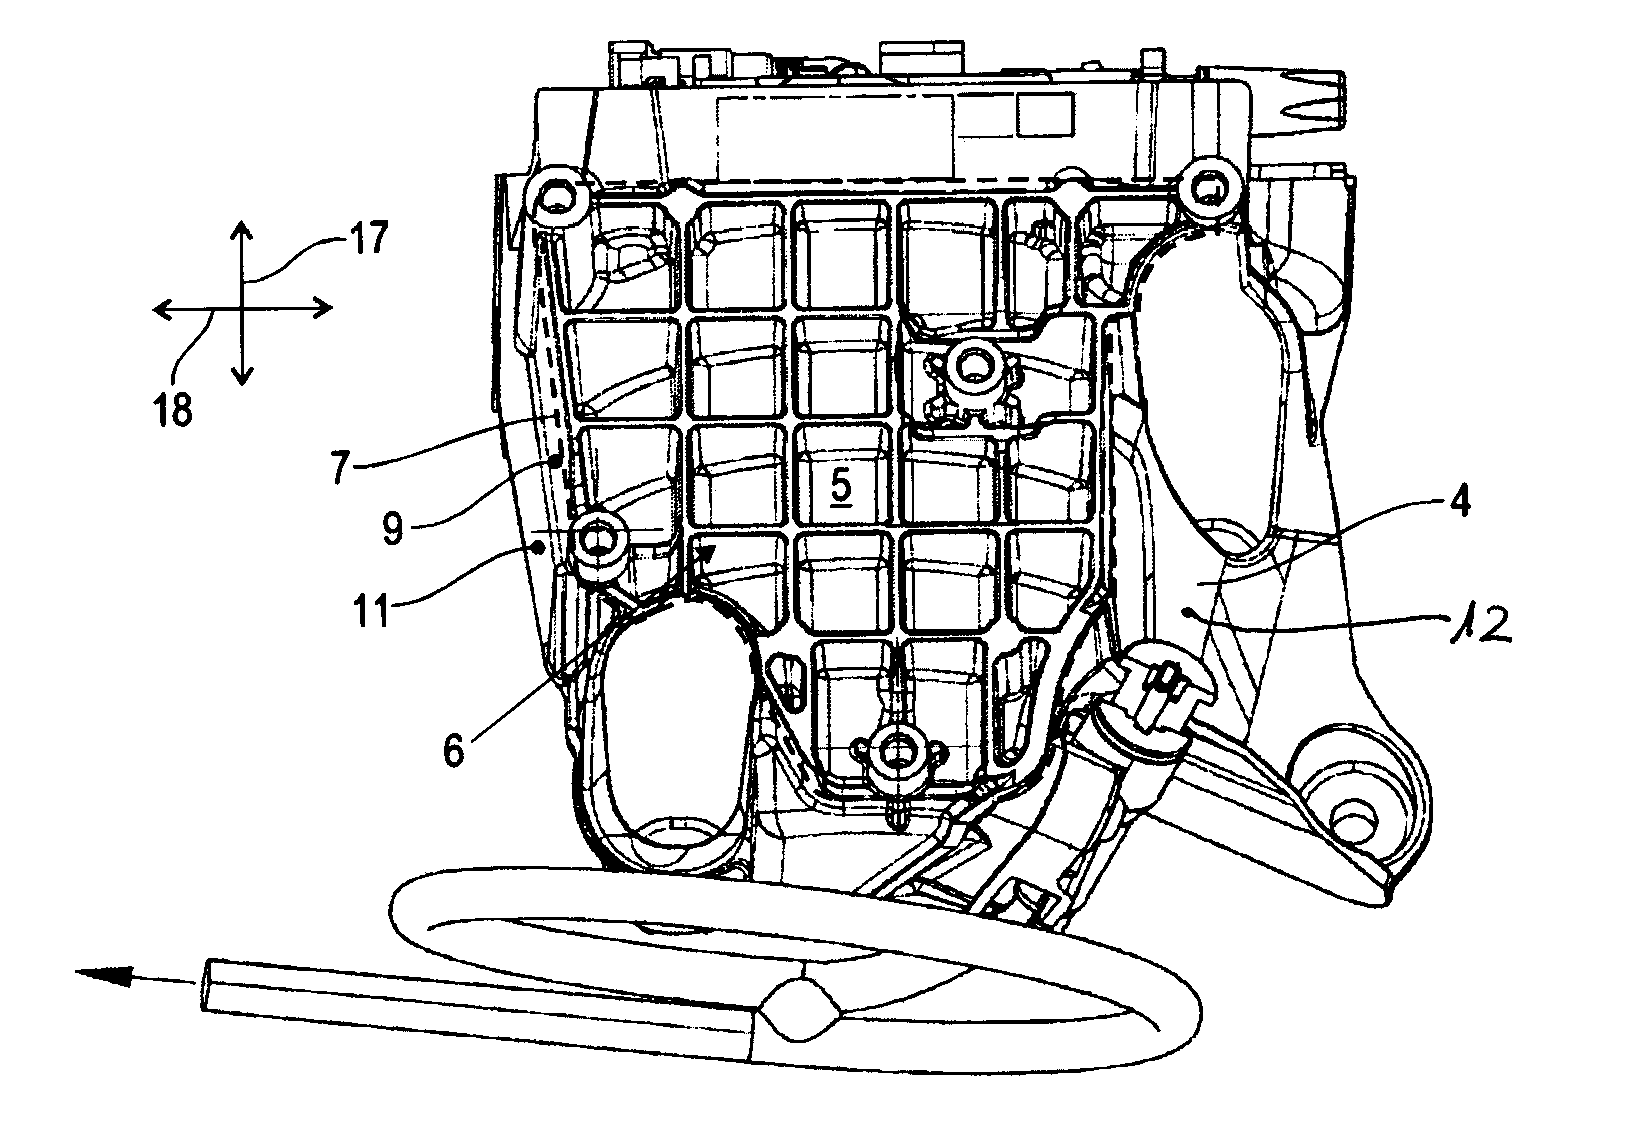 Fuel Filter of a Motor Vehicle